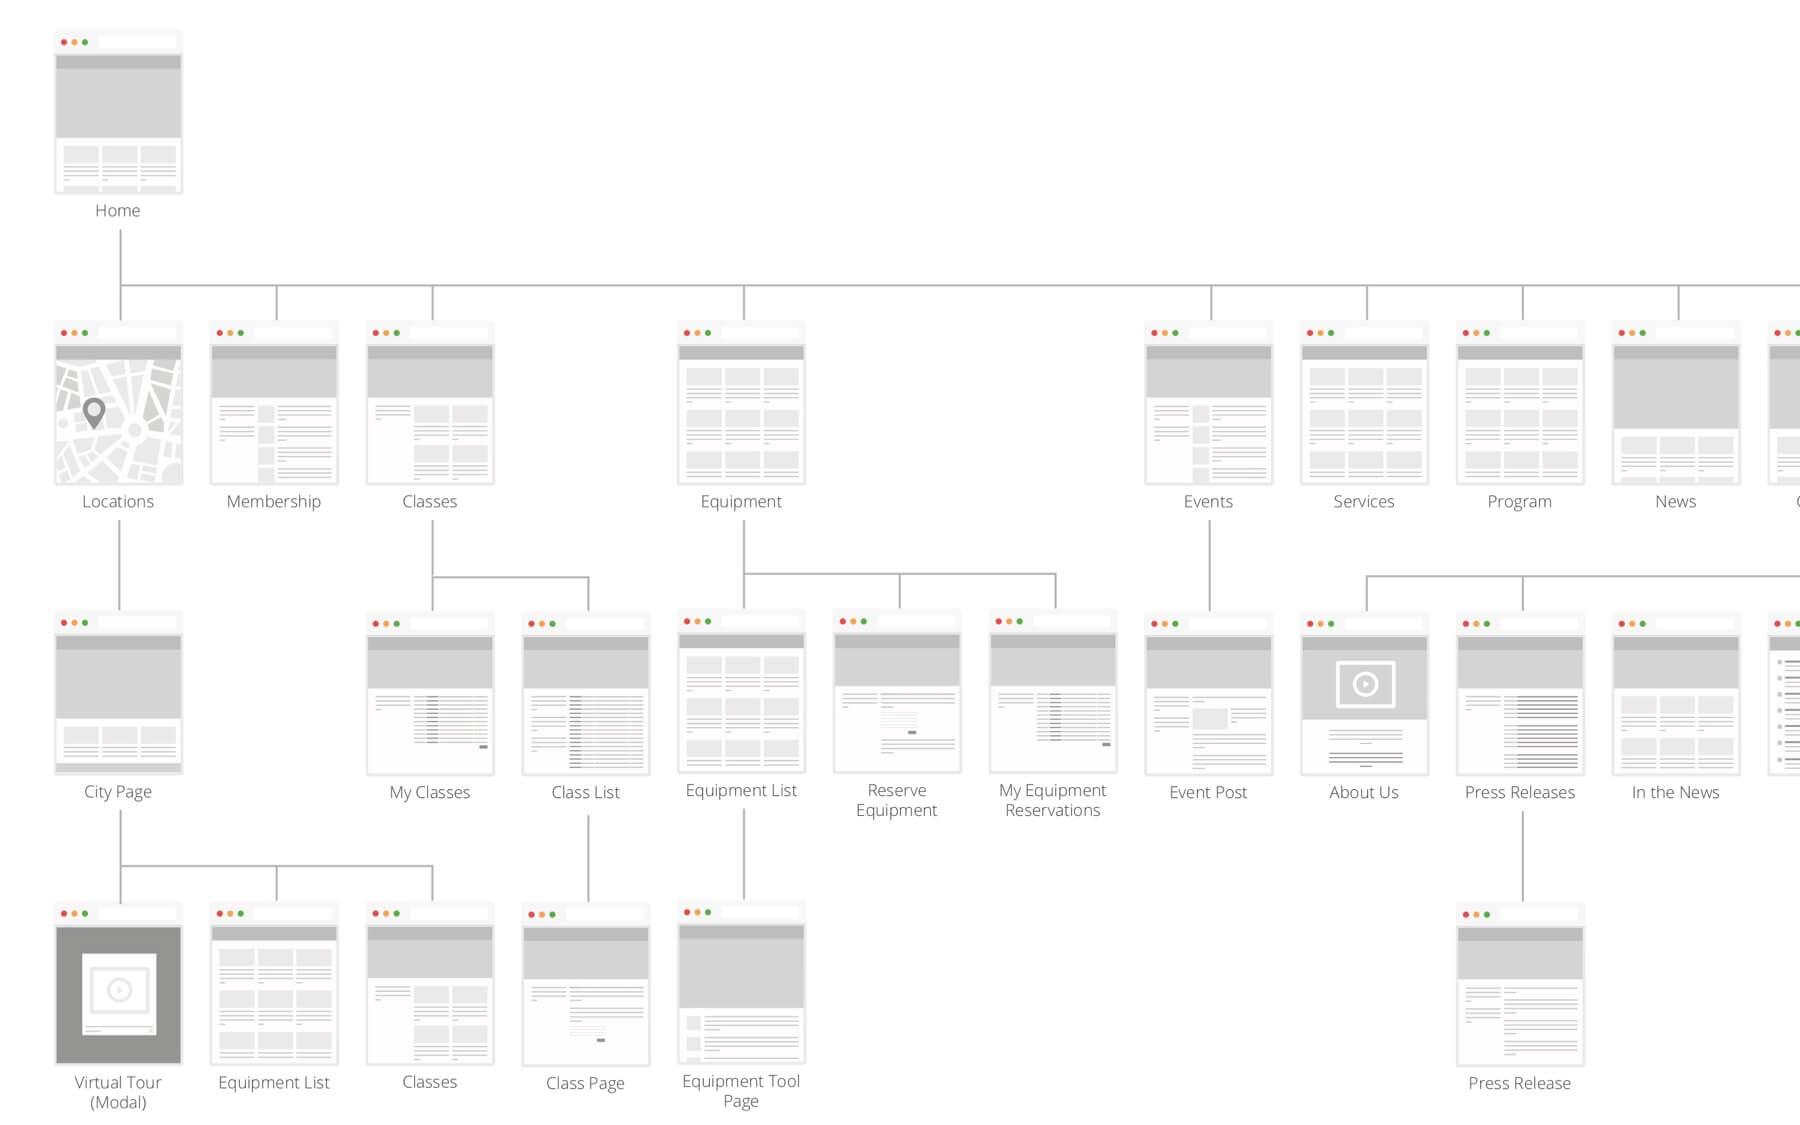 An image of a visual sitemap layout of the Techshop website